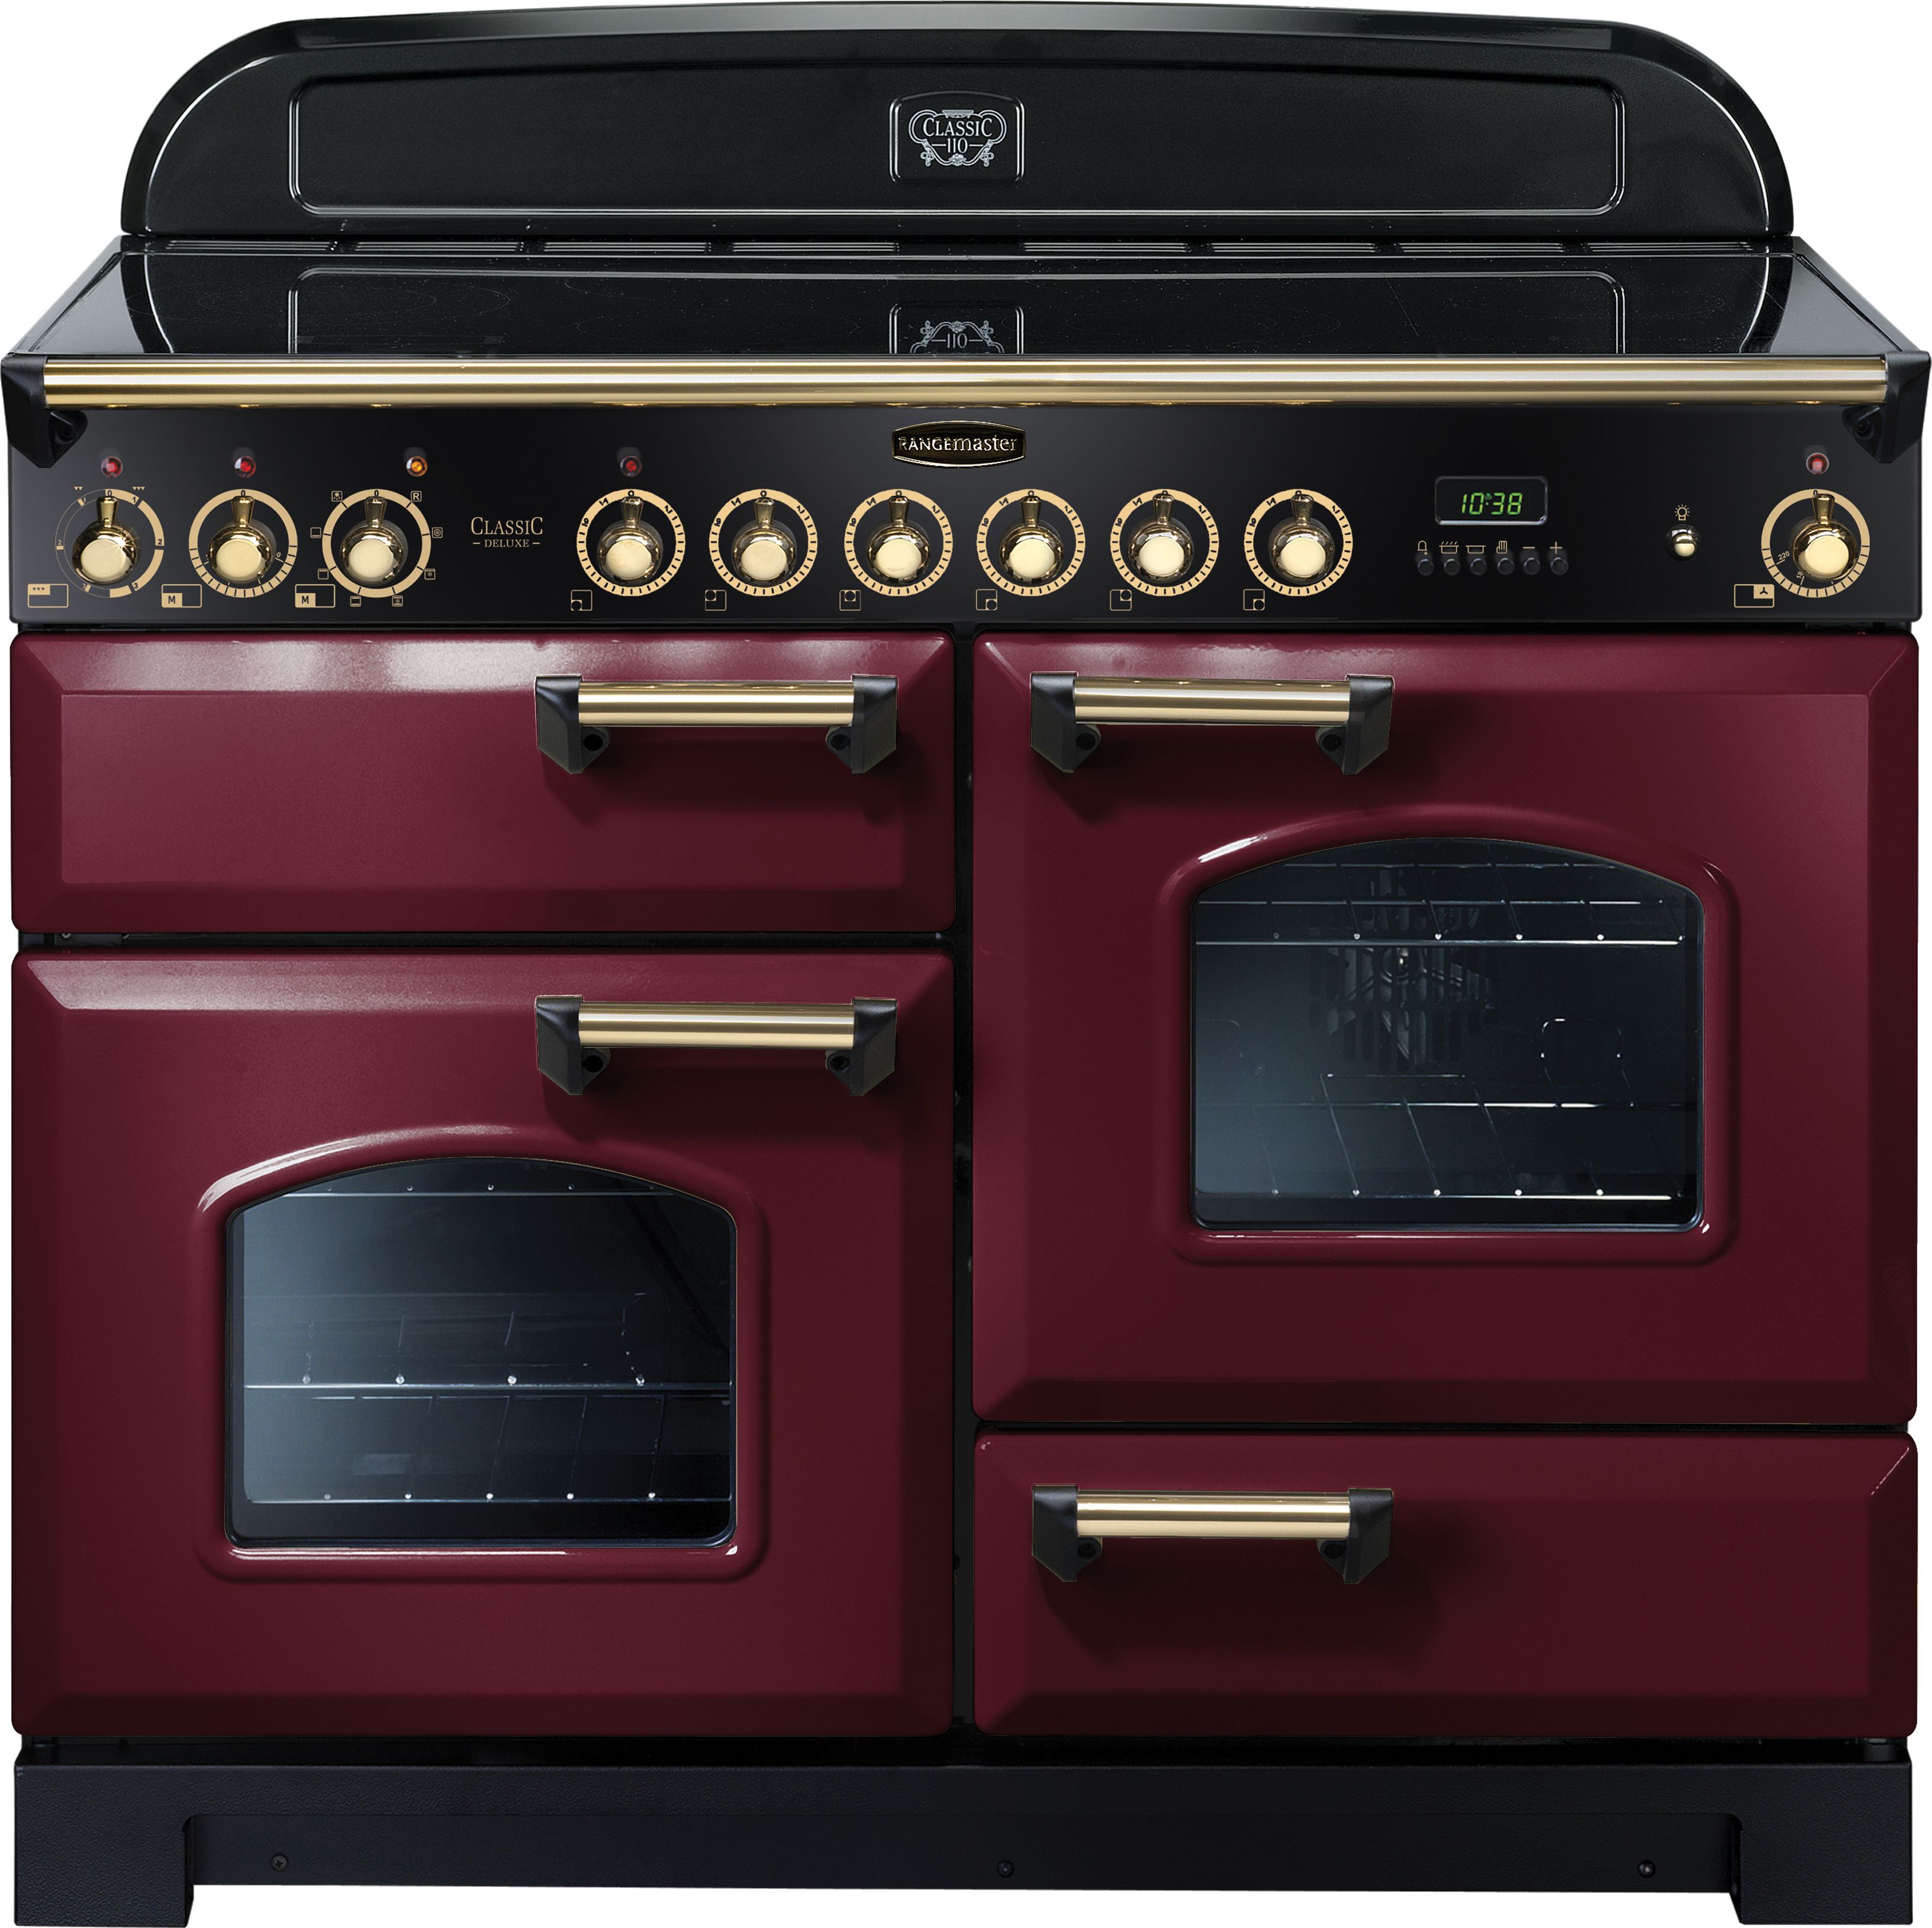 Rangemaster Classic Deluxe CDL110ECCY/B 110cm Electric Range Cooker with Ceramic Hob - Cranberry / Brass - A/A Rated, Red